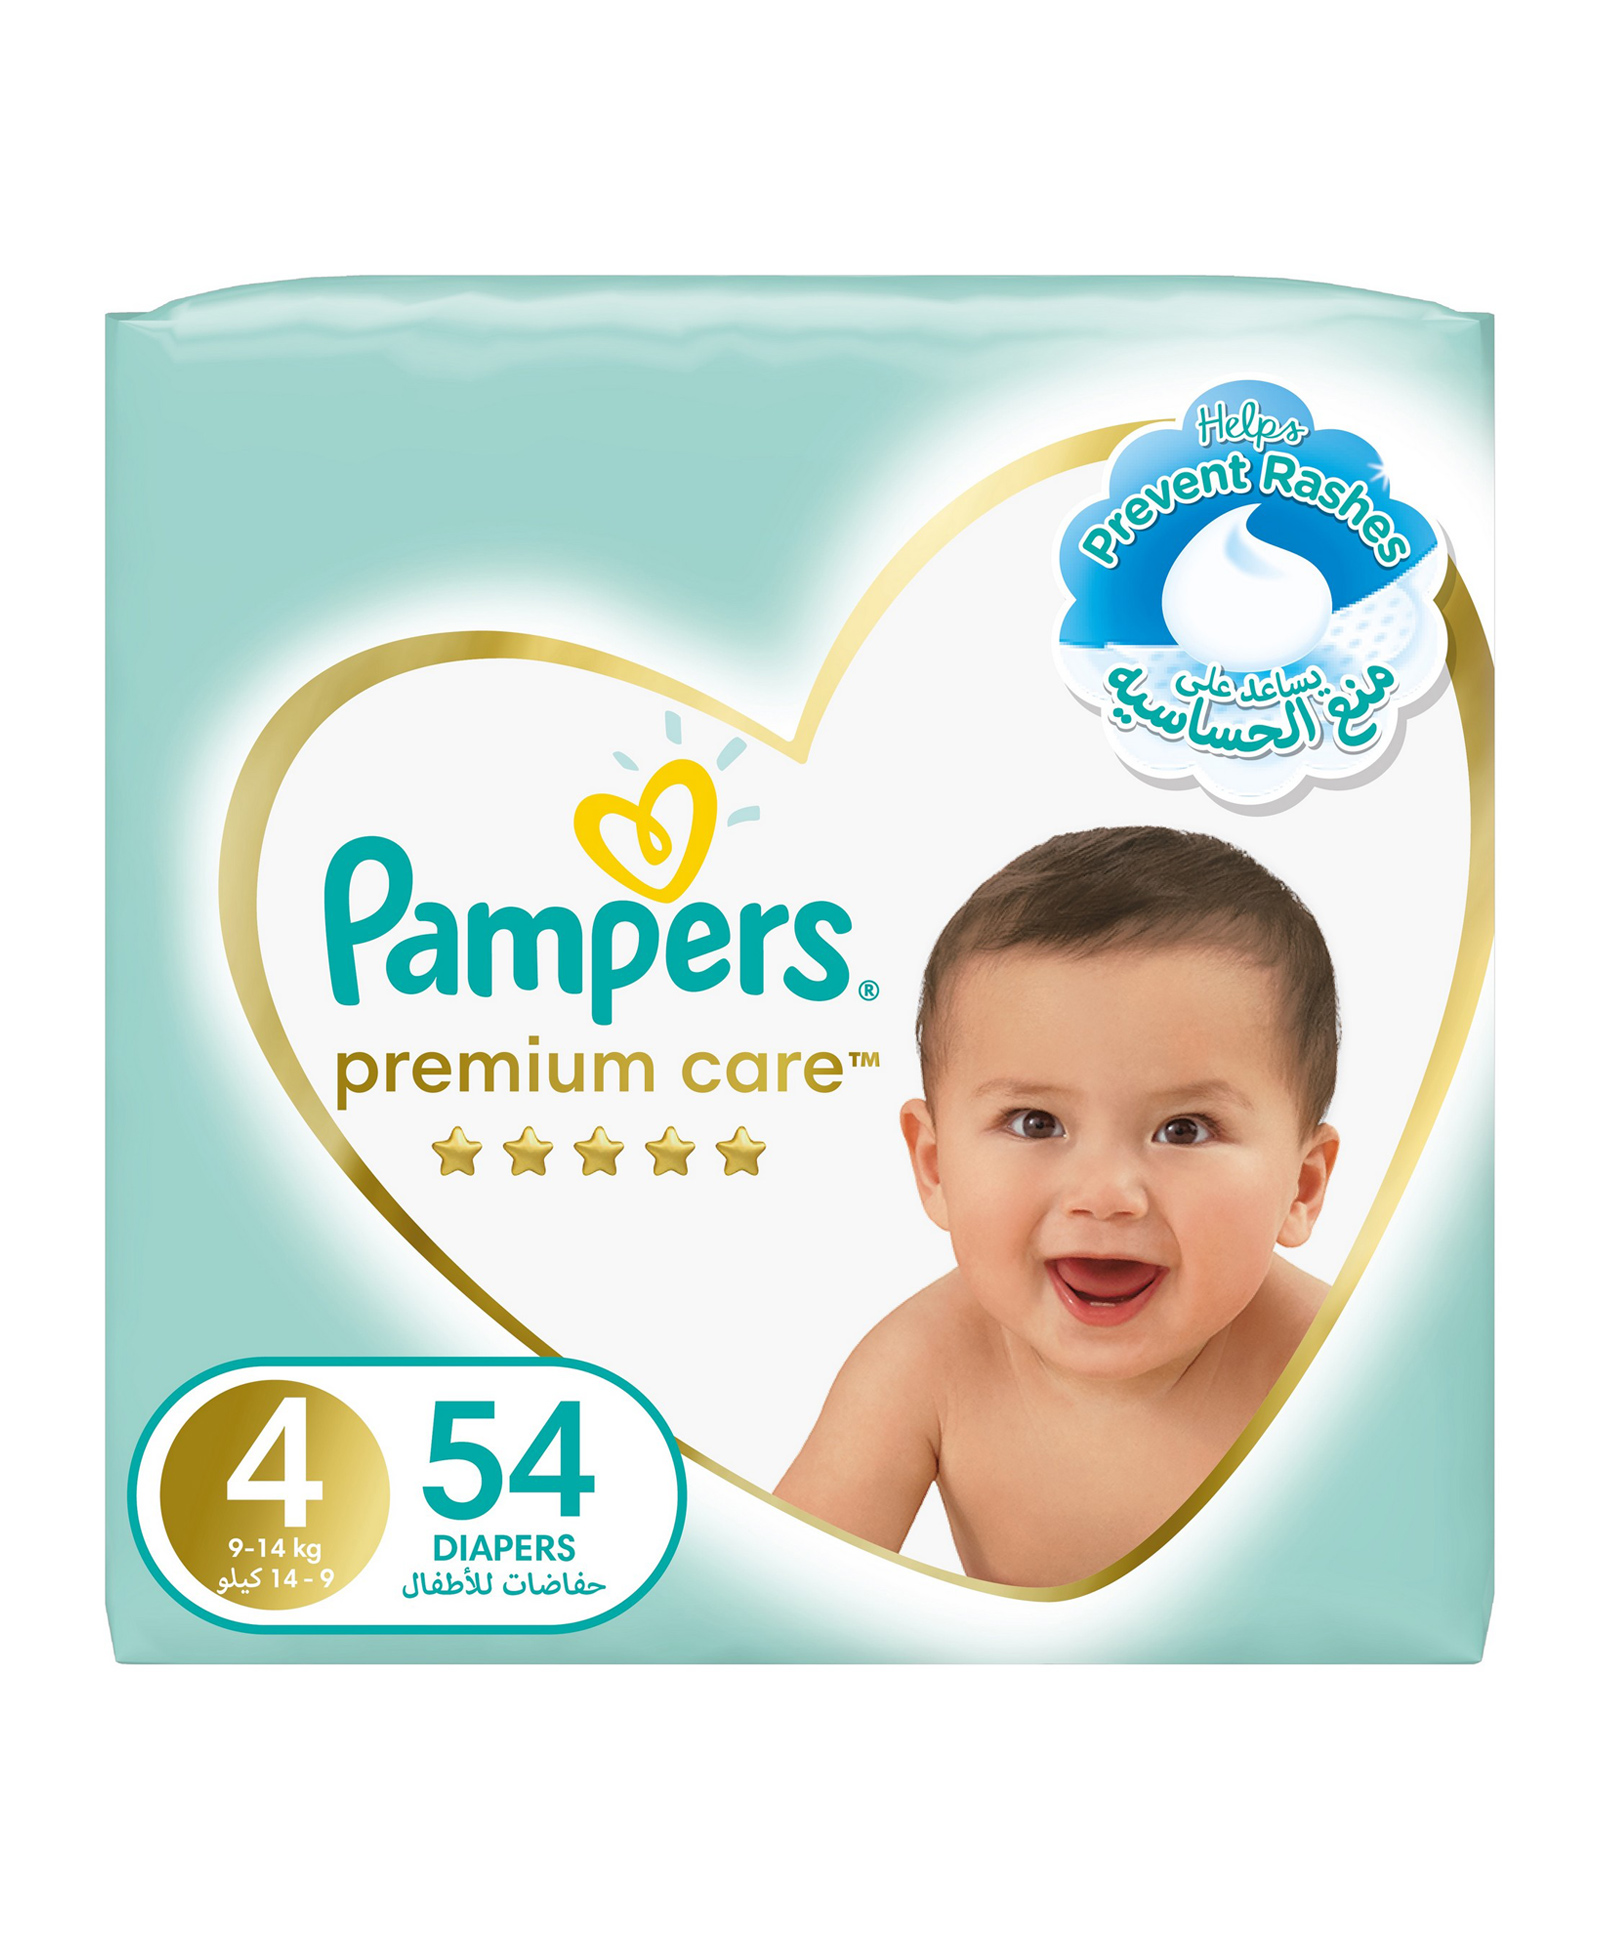 Pampers Premium Care Diapers Size 4 Maxi - 54 Pieces Online in UAE, Buy